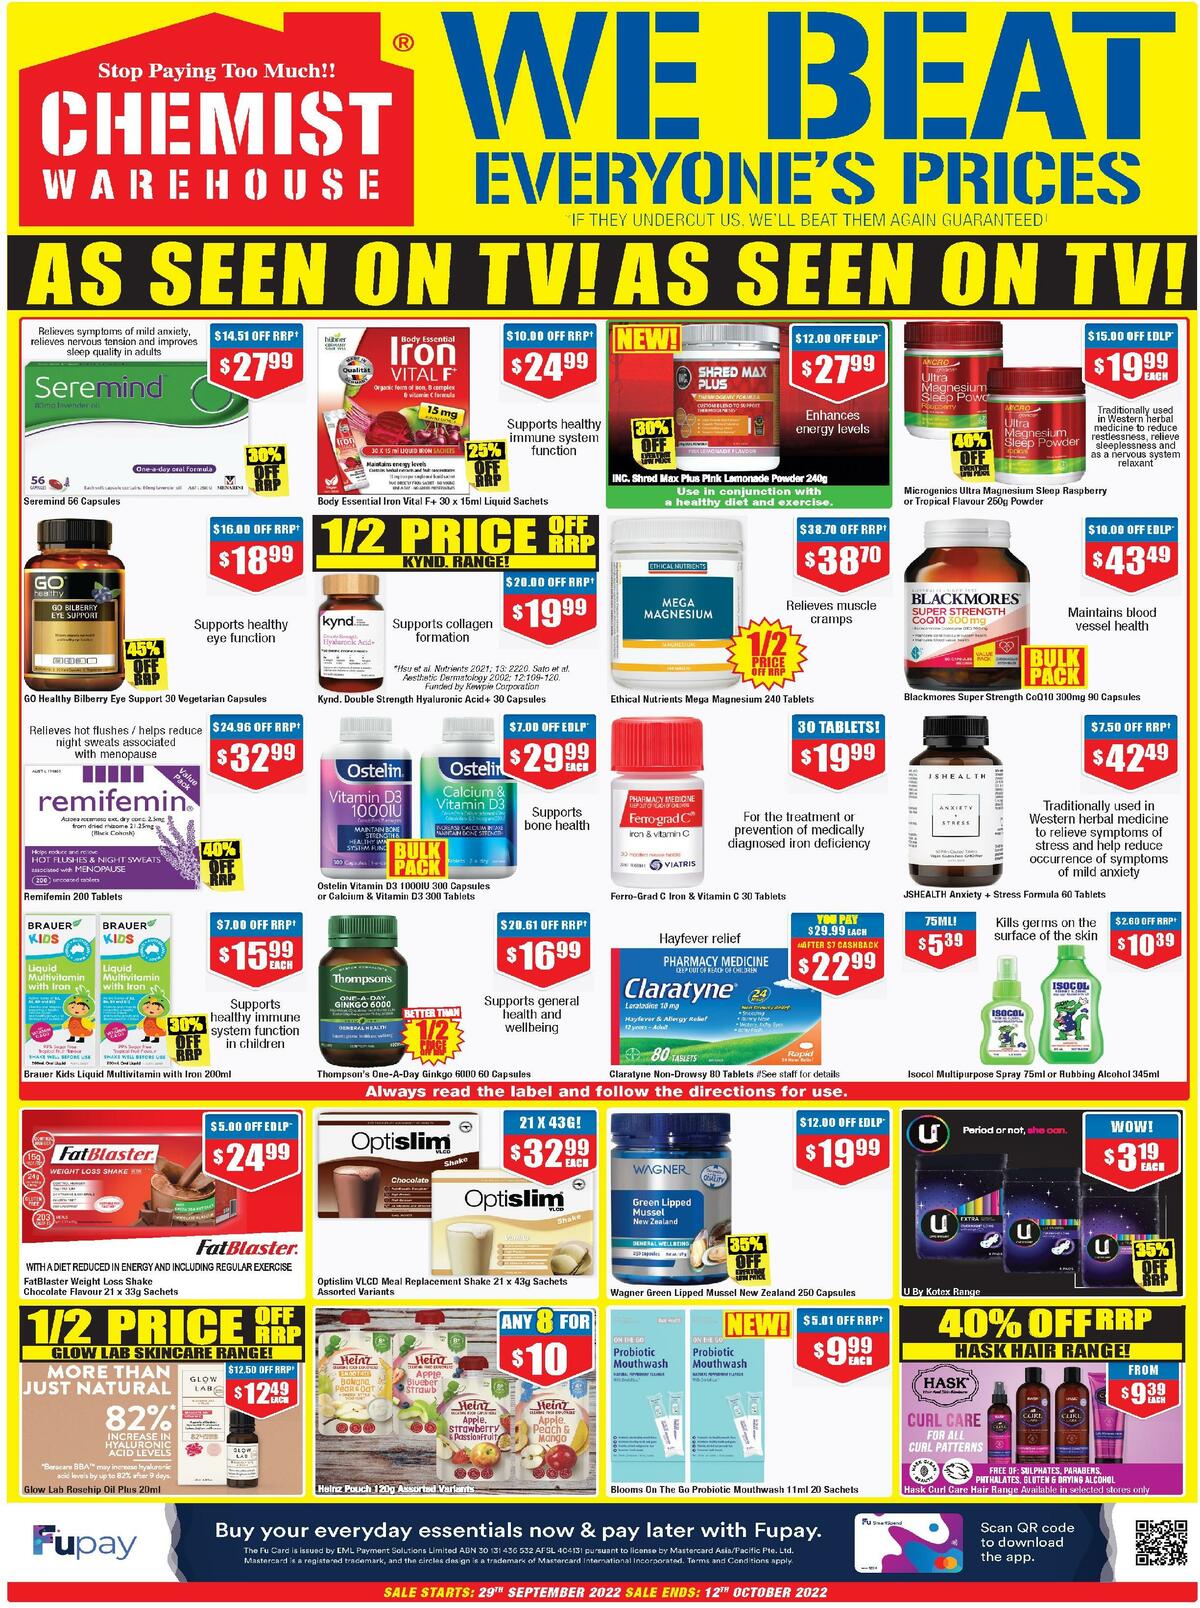 Chemist Warehouse October Catalogues from 29 September